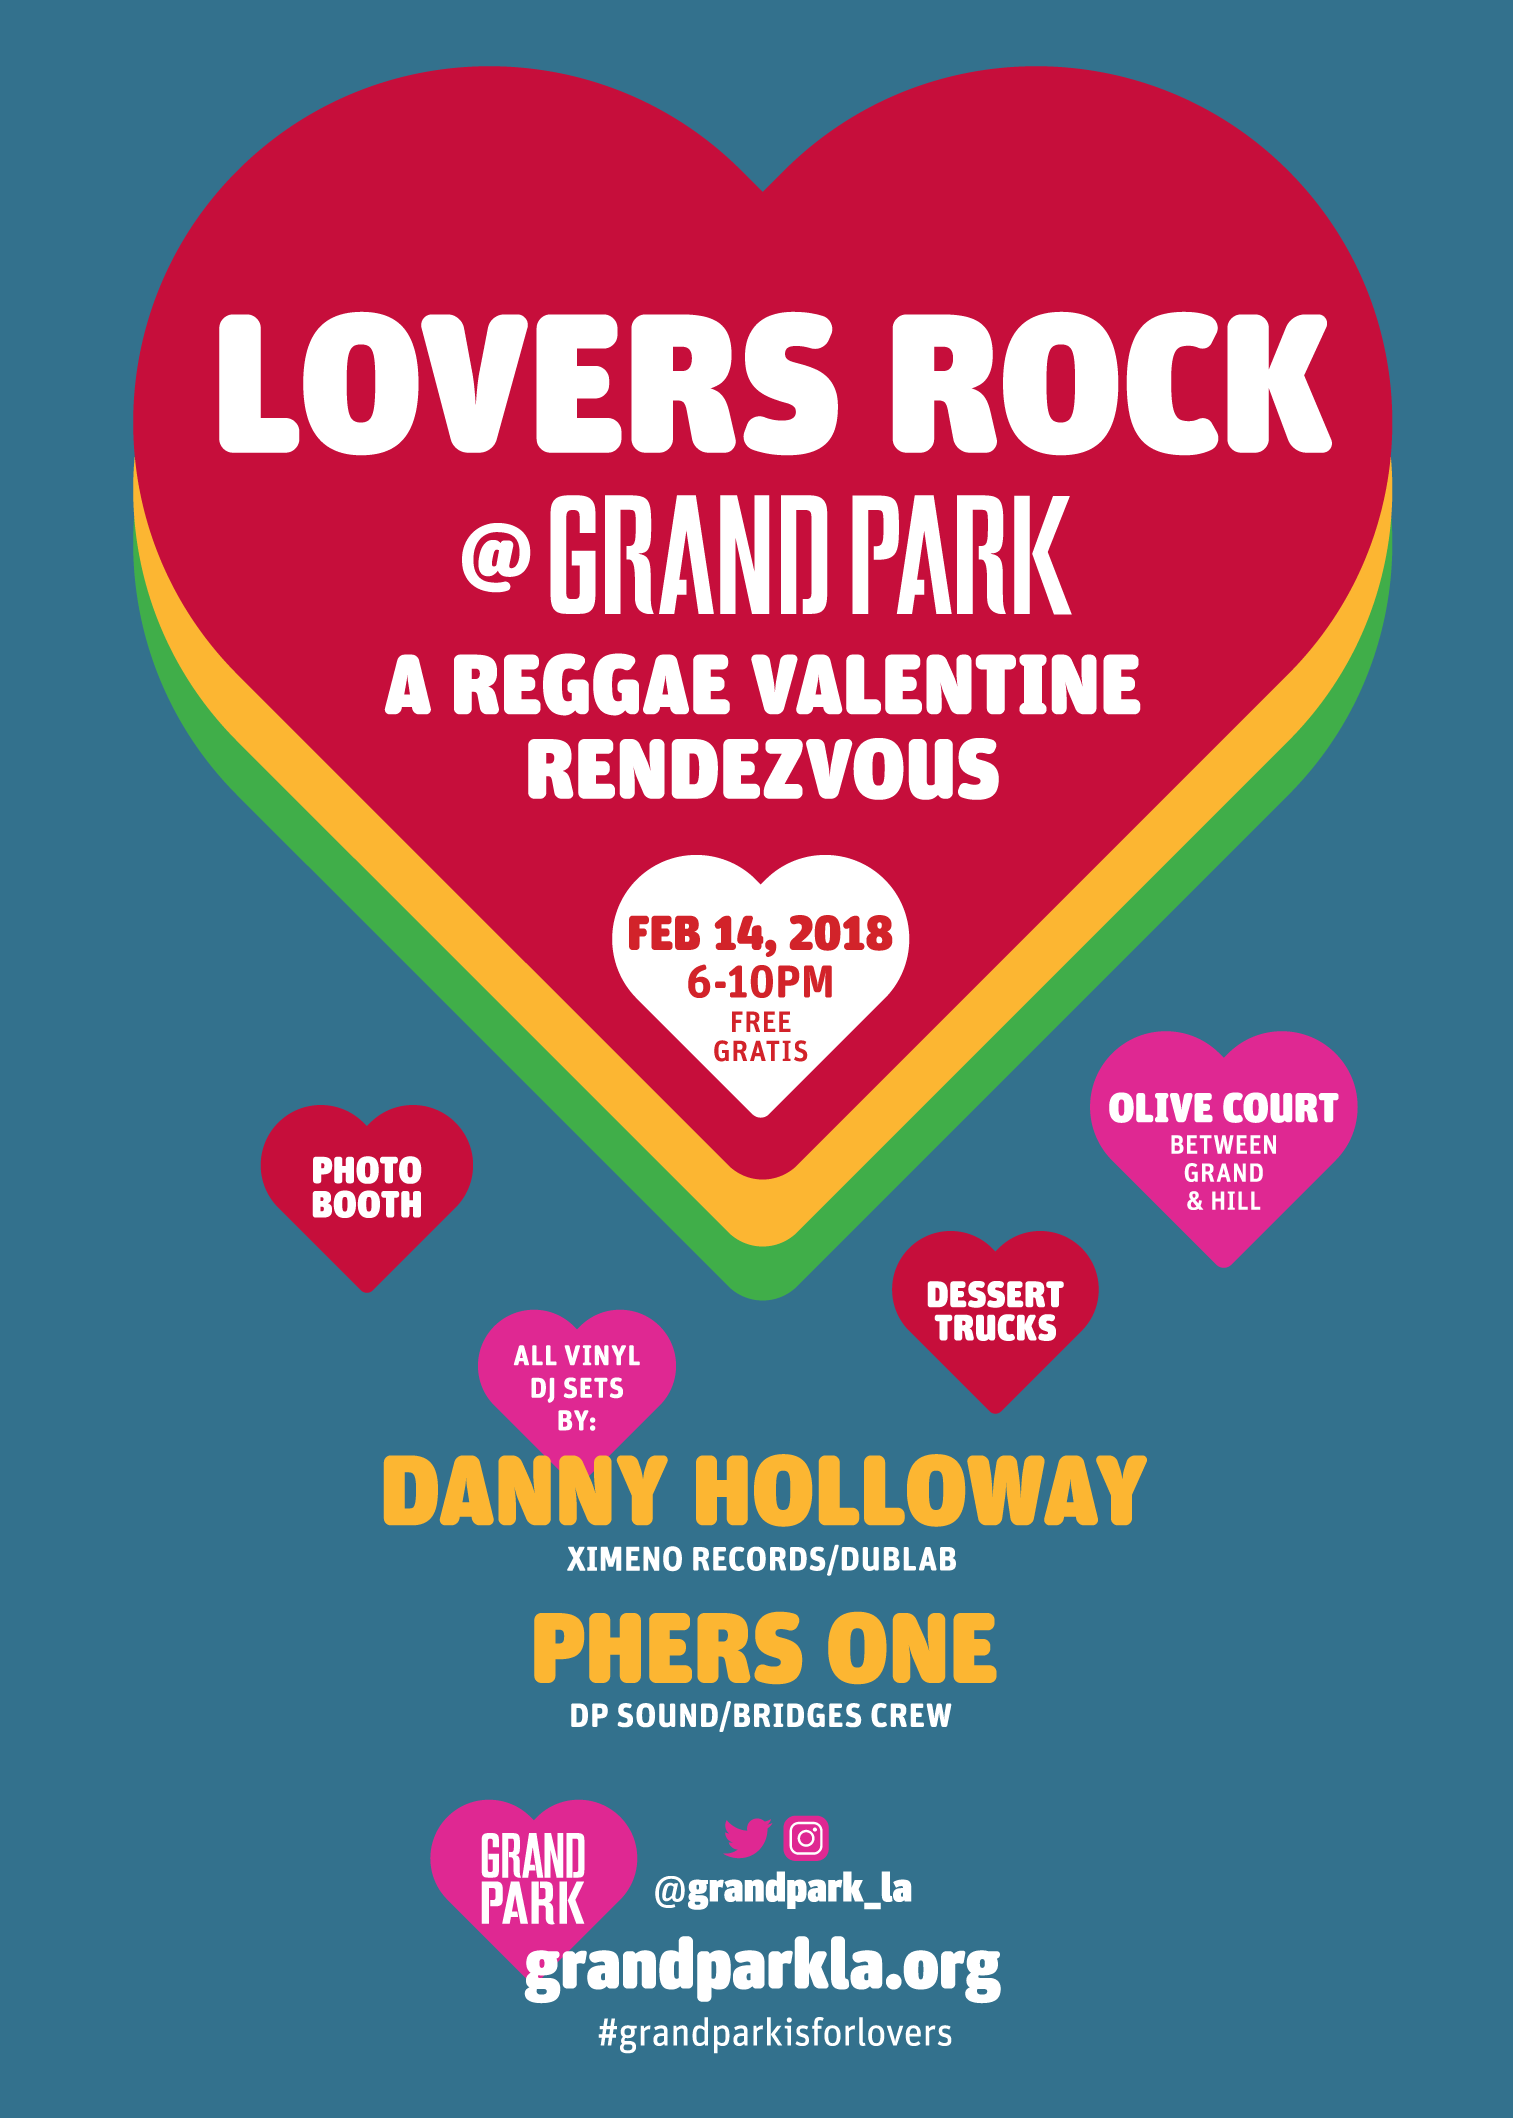 Lovers Rock @ Grand Park party flyer